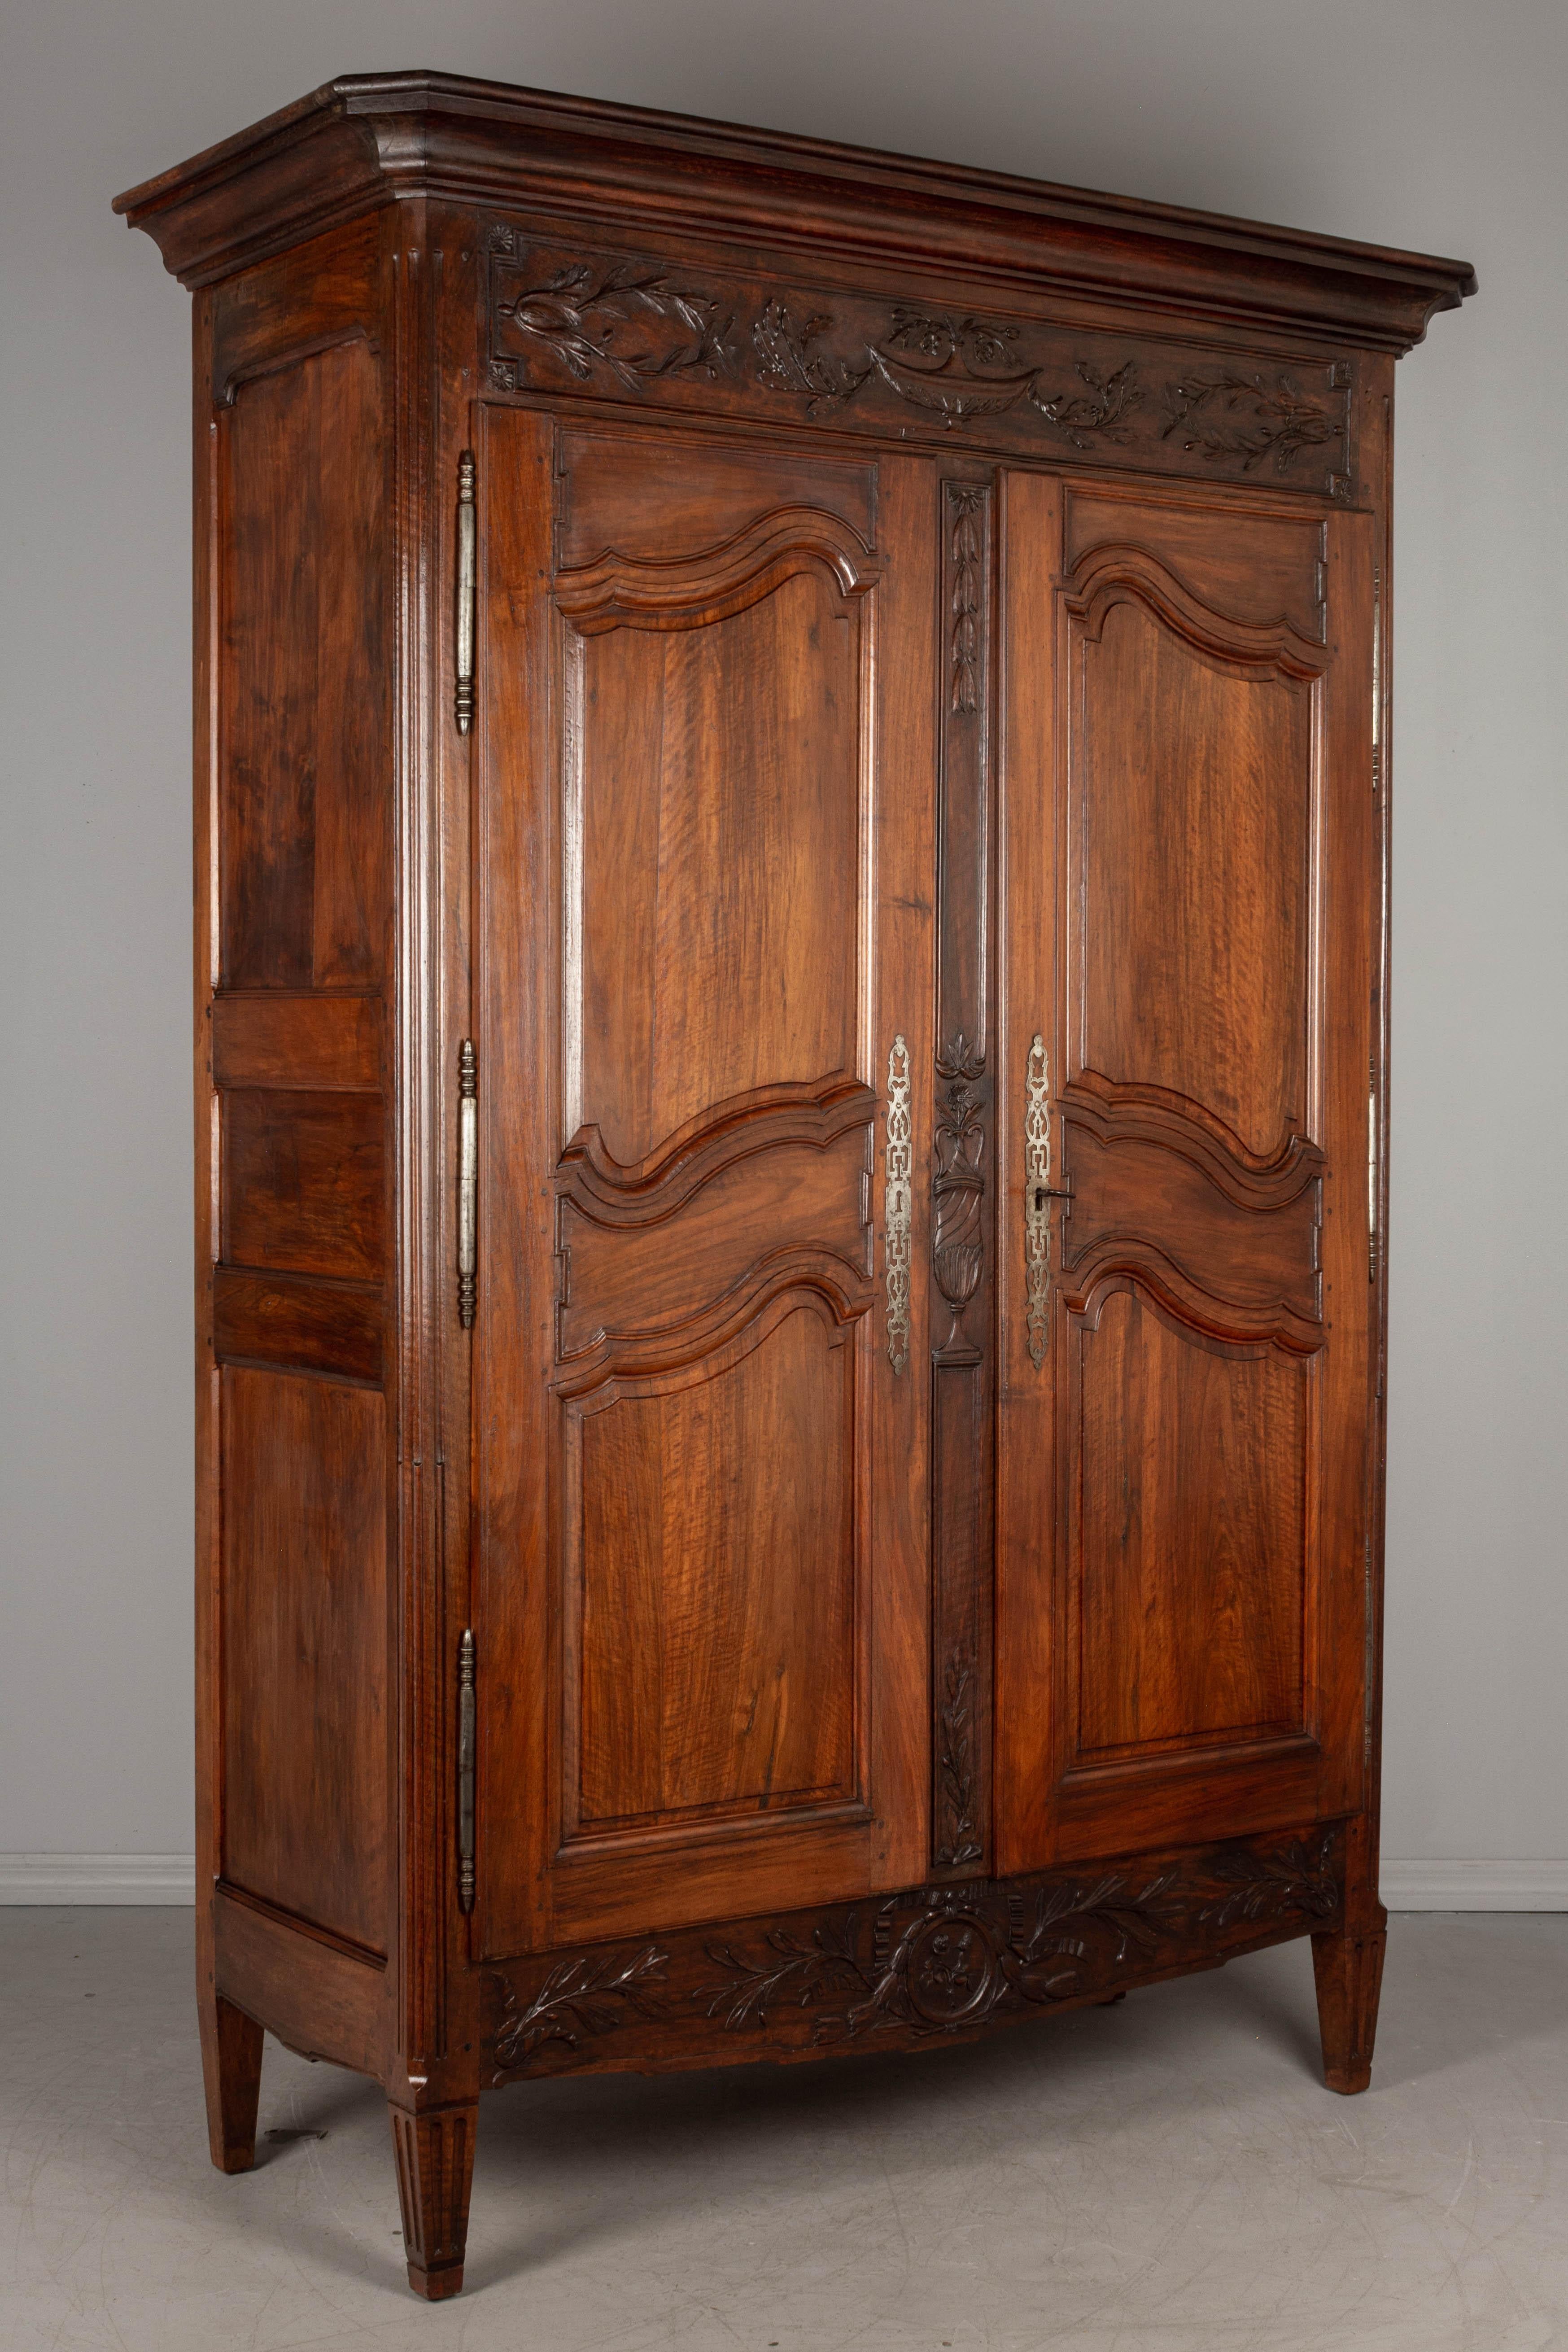 19th century french armoire